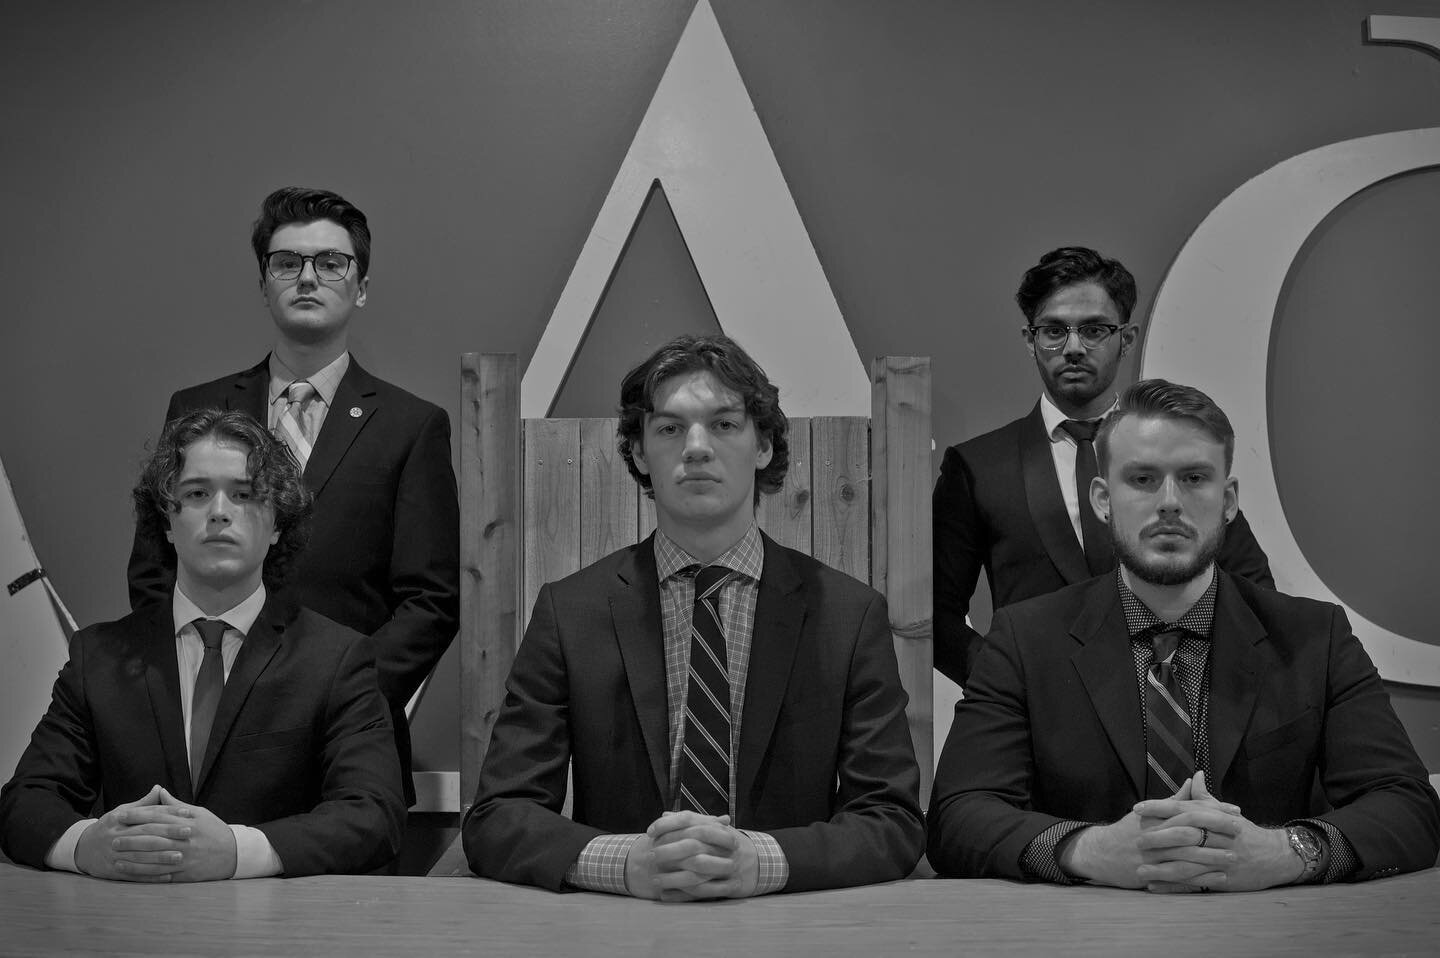 Introducing our 2022 Executive Team:

President - Eamonn Gaunt
VPI - Noah Battista
VPO - Aleks Walter
Treasurer - Tanner Braden 
Rush chairman - Dev Gupta 

Join the BC Chapter of Alpha Delta Phi in welcoming these fine men into their new positions!